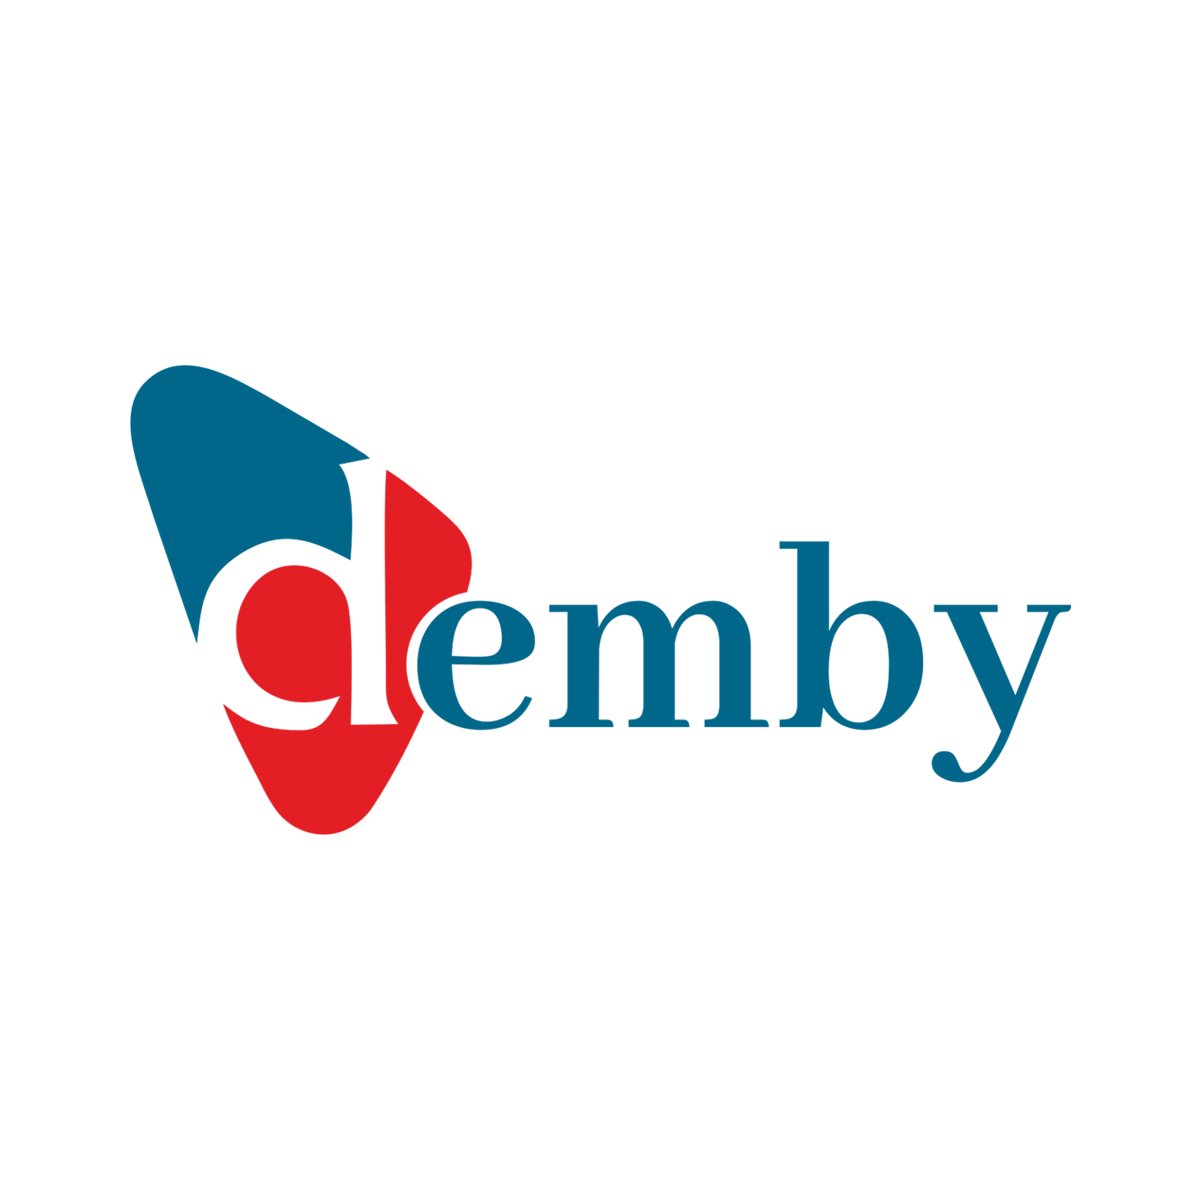 Demby is an independent cryptocurrency based marketplace where people can get anything they want, from a yacht to gold, everything is available in Demby.